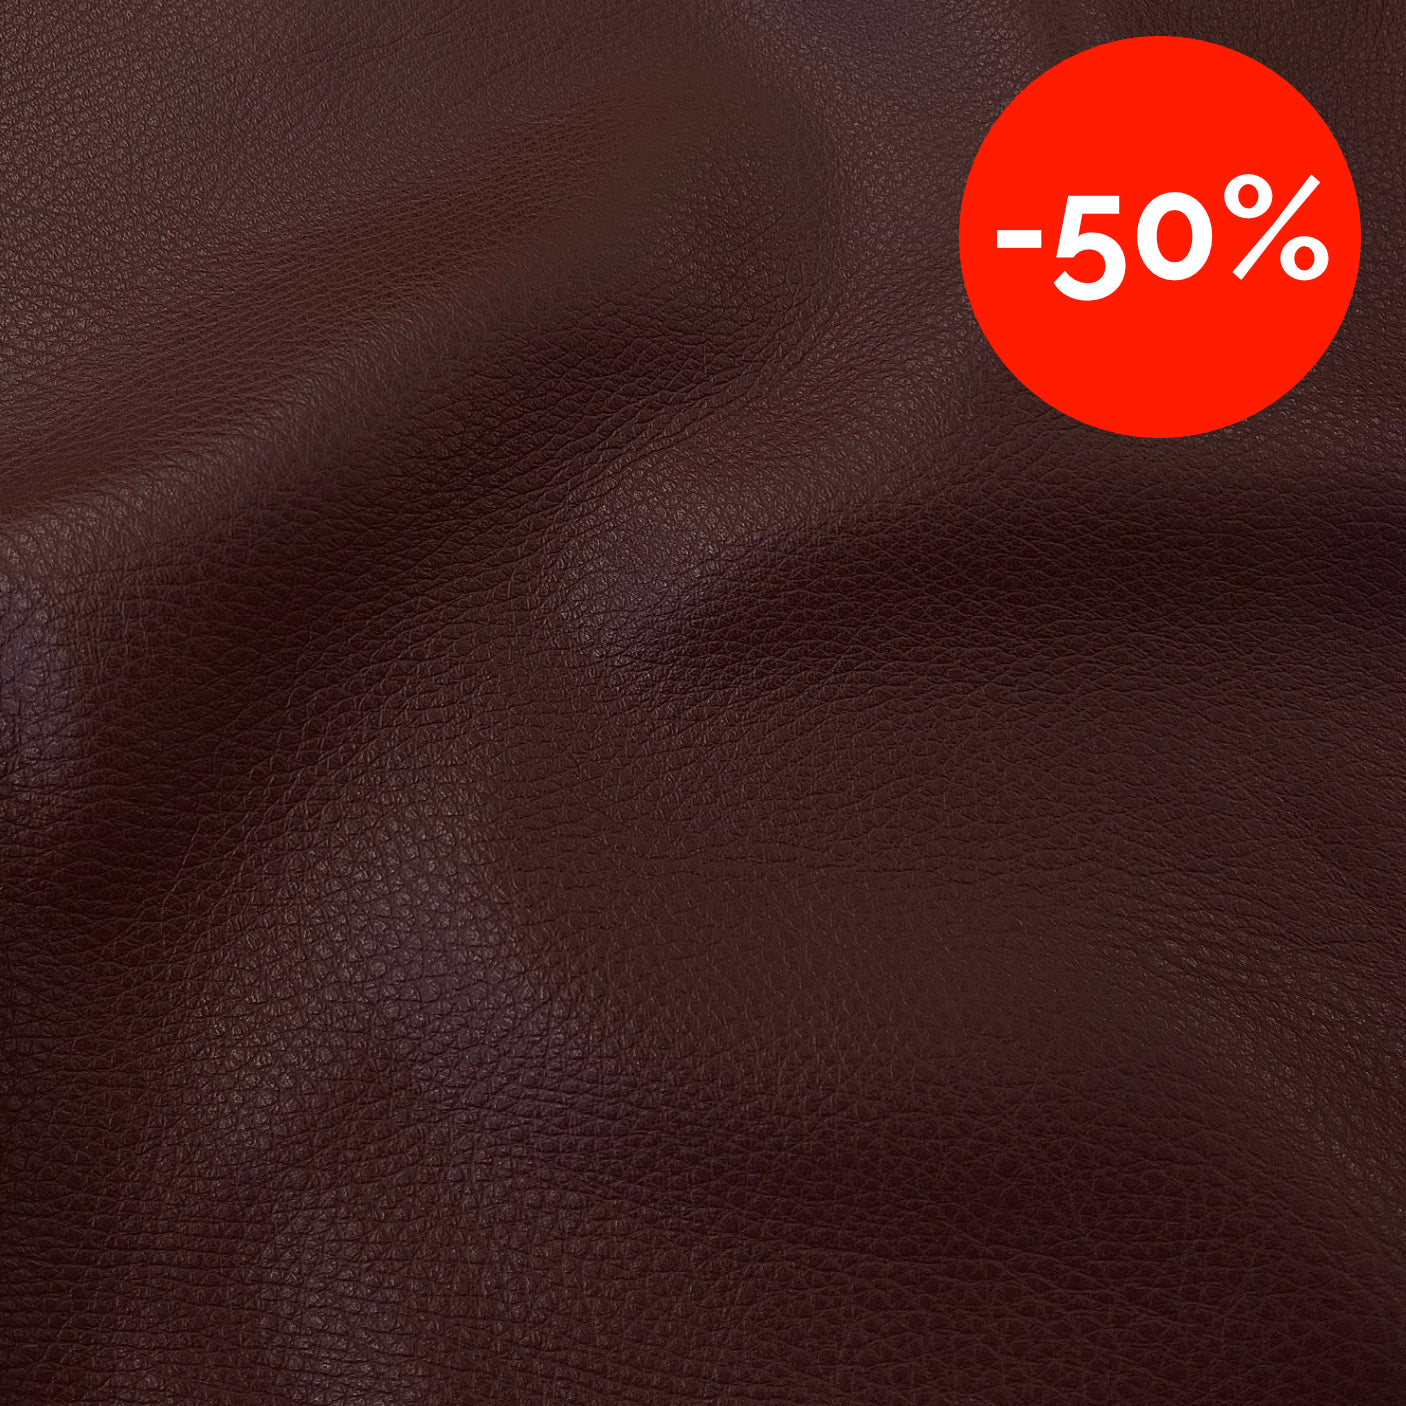 Natural Grain Cow Leathers: 12'' x 12'' Pre-Cut Leather Pieces (Chocolate  Brown, 1 Piece)